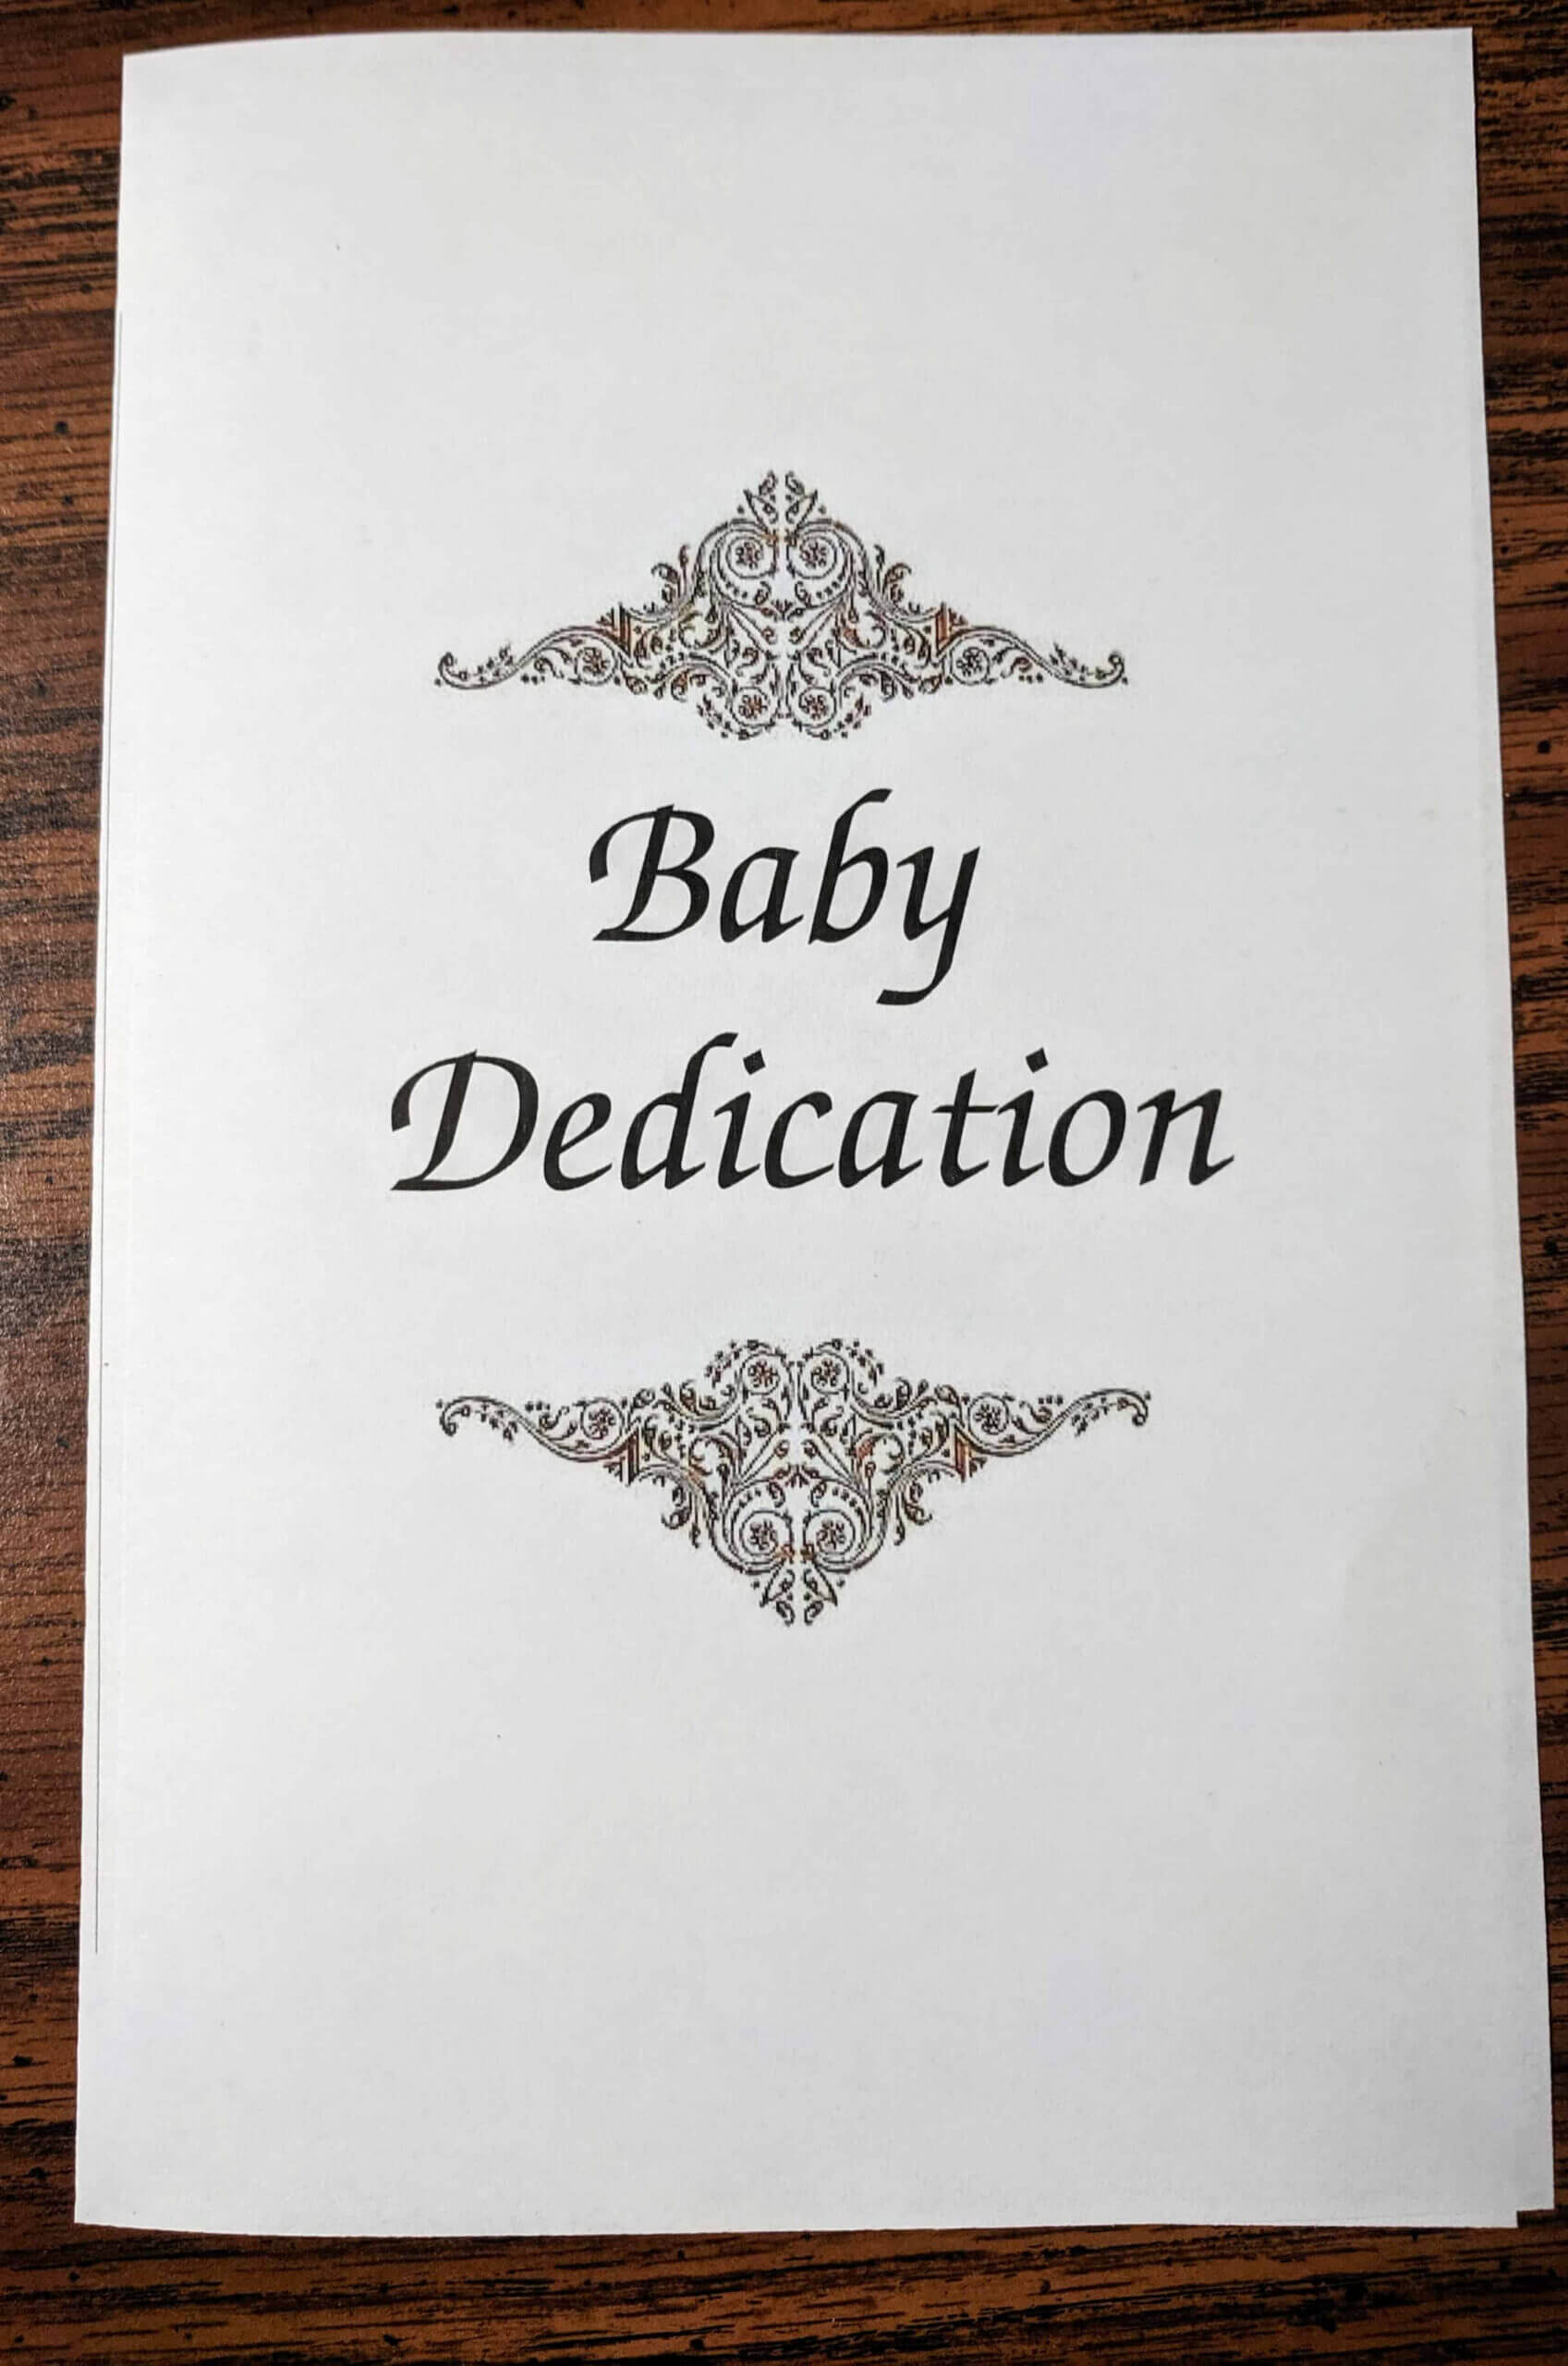 Baby Dedication Ceremony: What You Need To Know — Ministry Regarding Baby Dedication Certificate Template